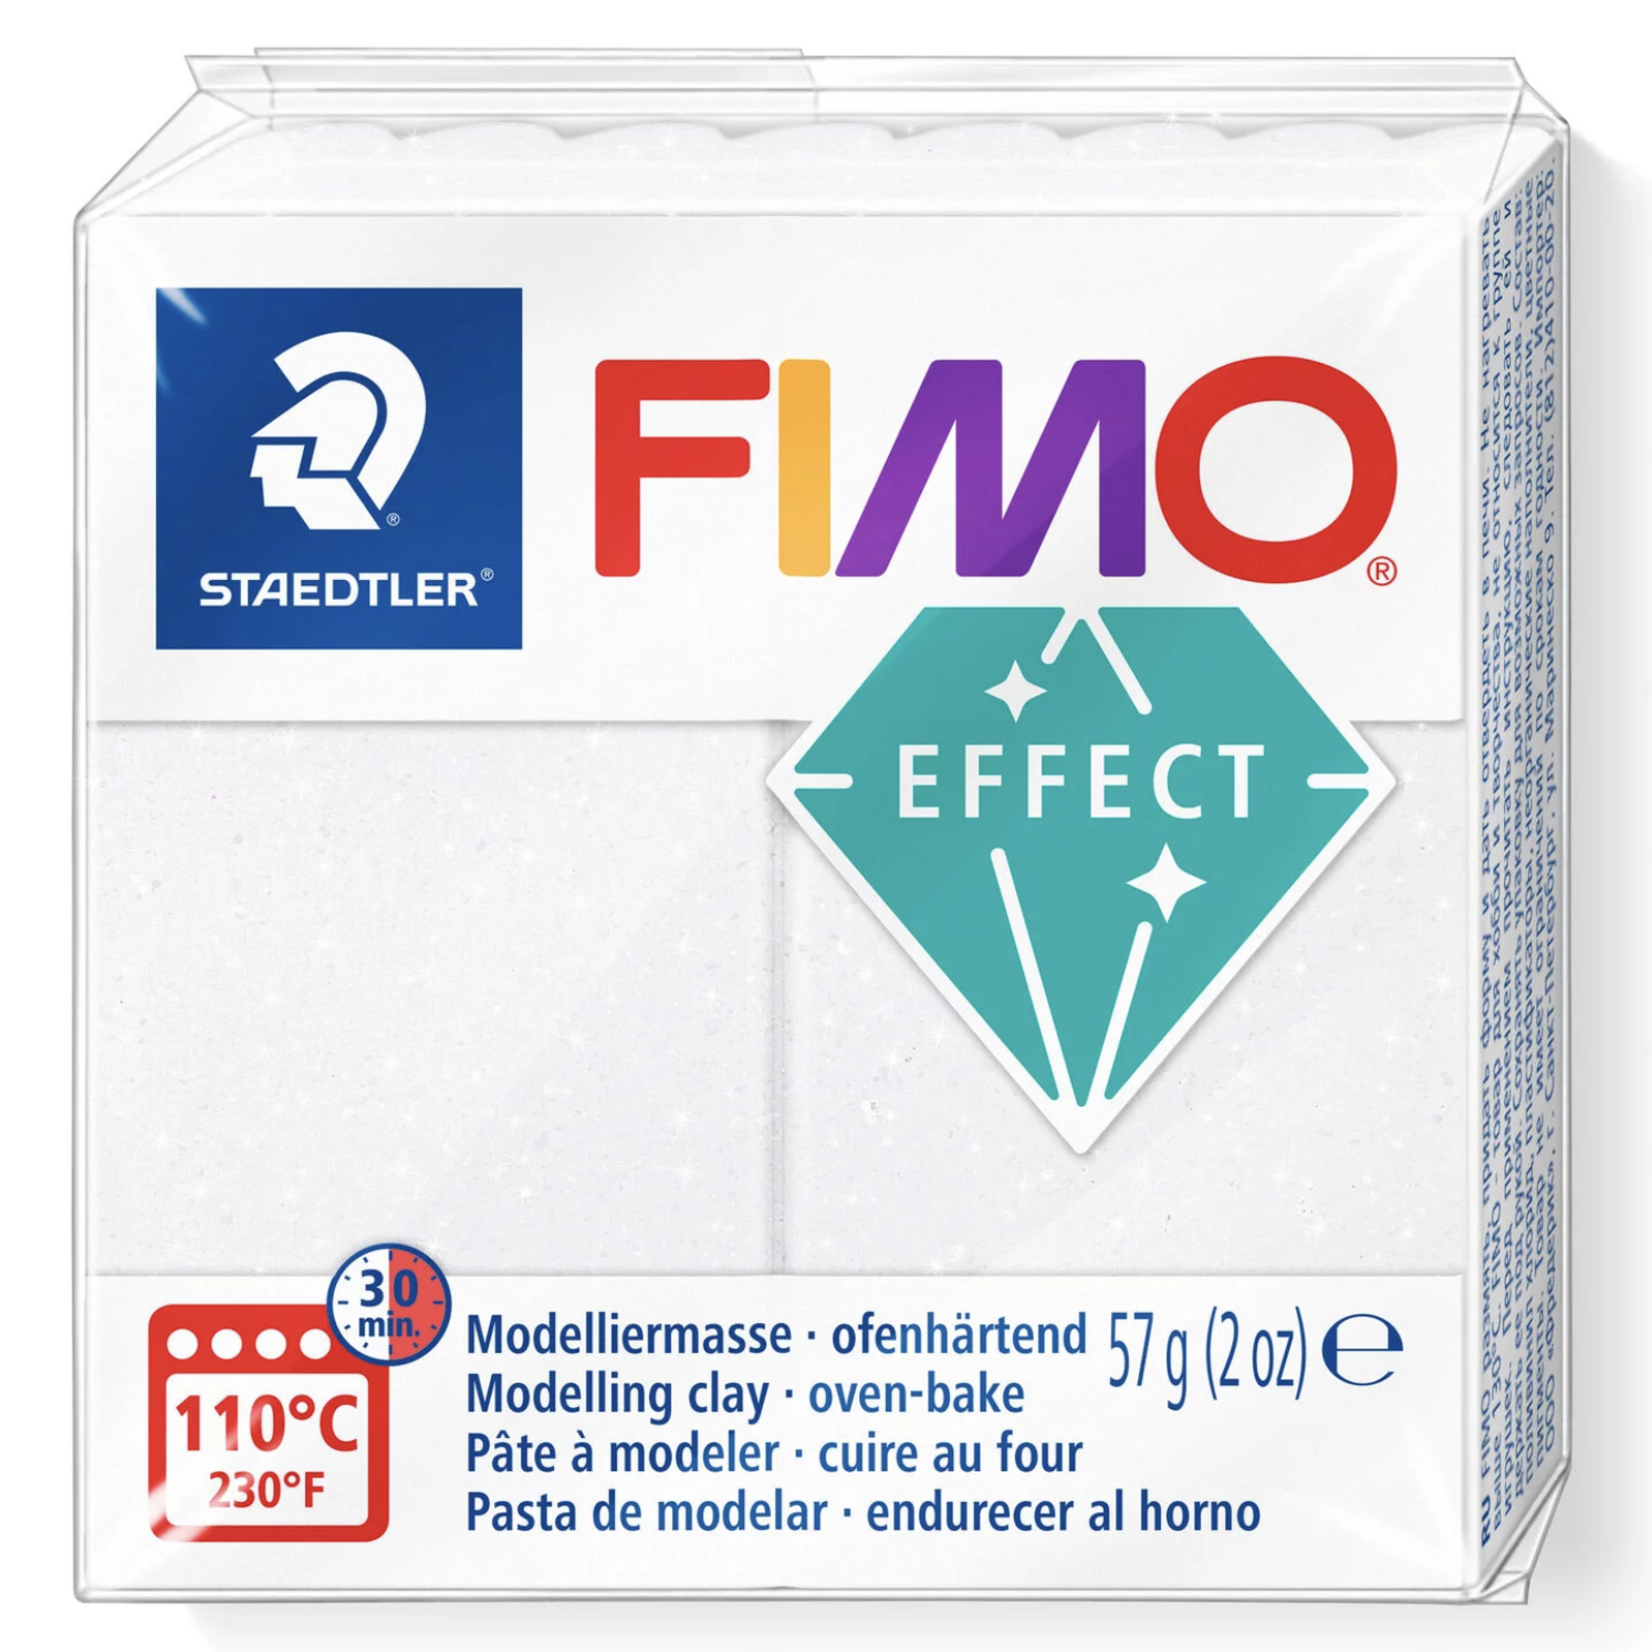 STAEDTLER FIMO EFFECT GALAXY 002 WHITE